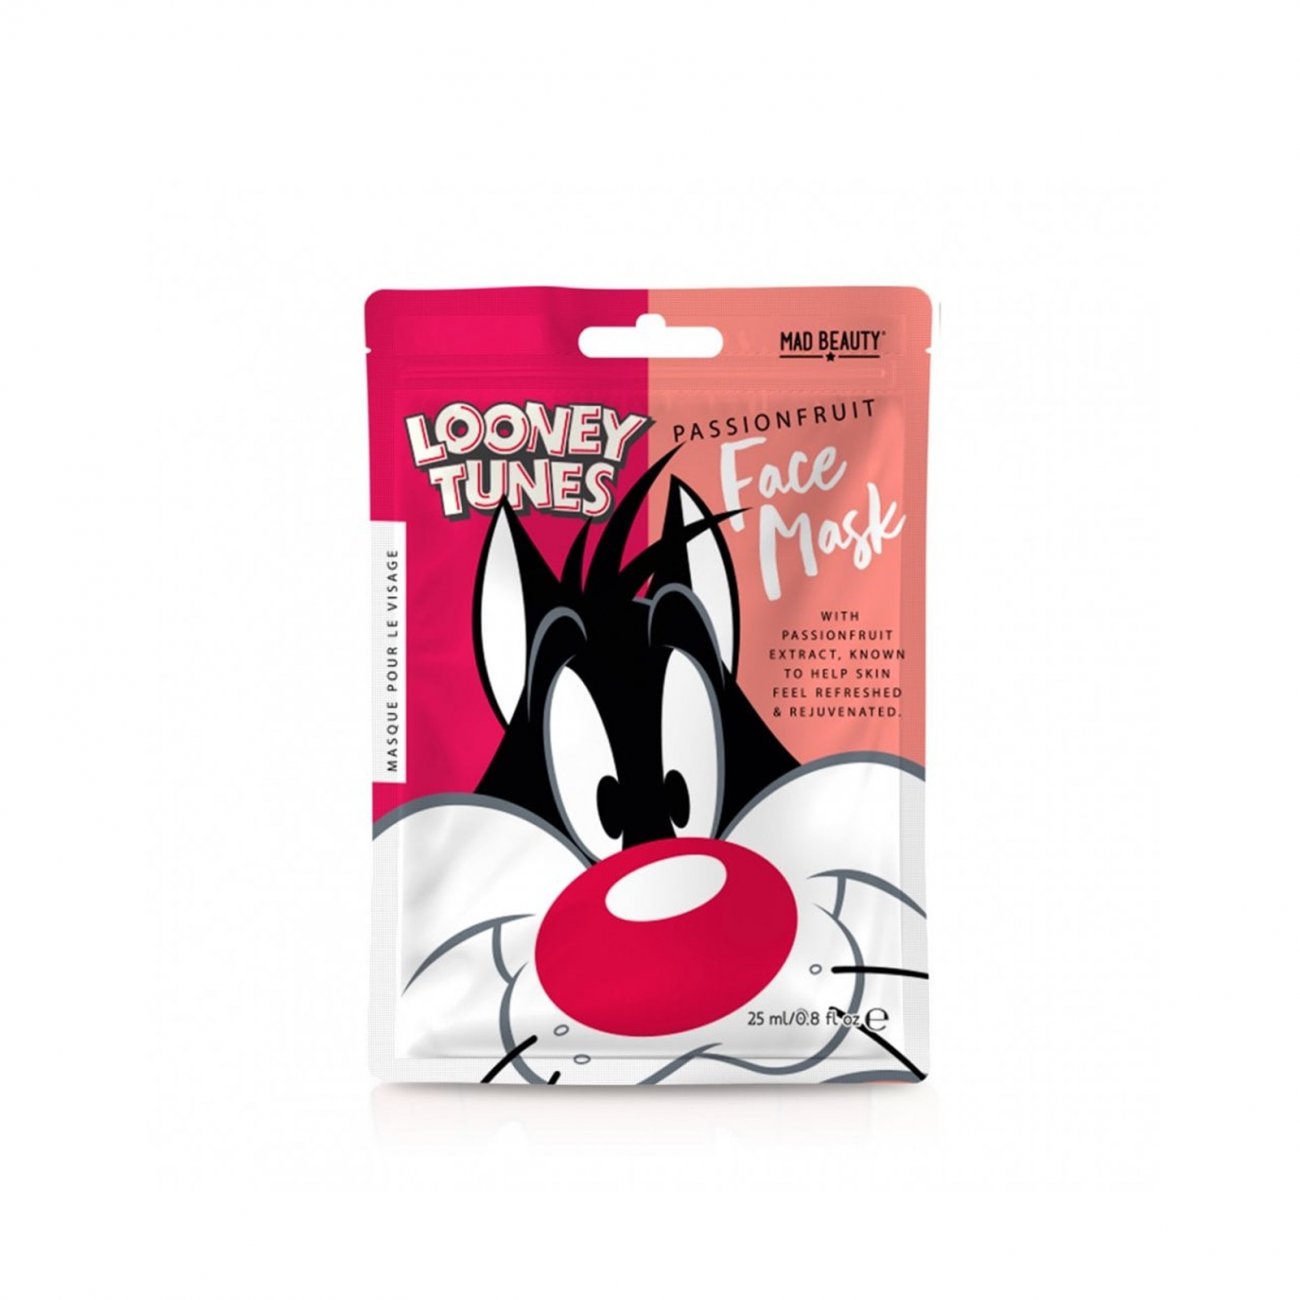 Mad Beauty Warner Brothers Looney Tunes Sylvester Masque en feuille 25 ml